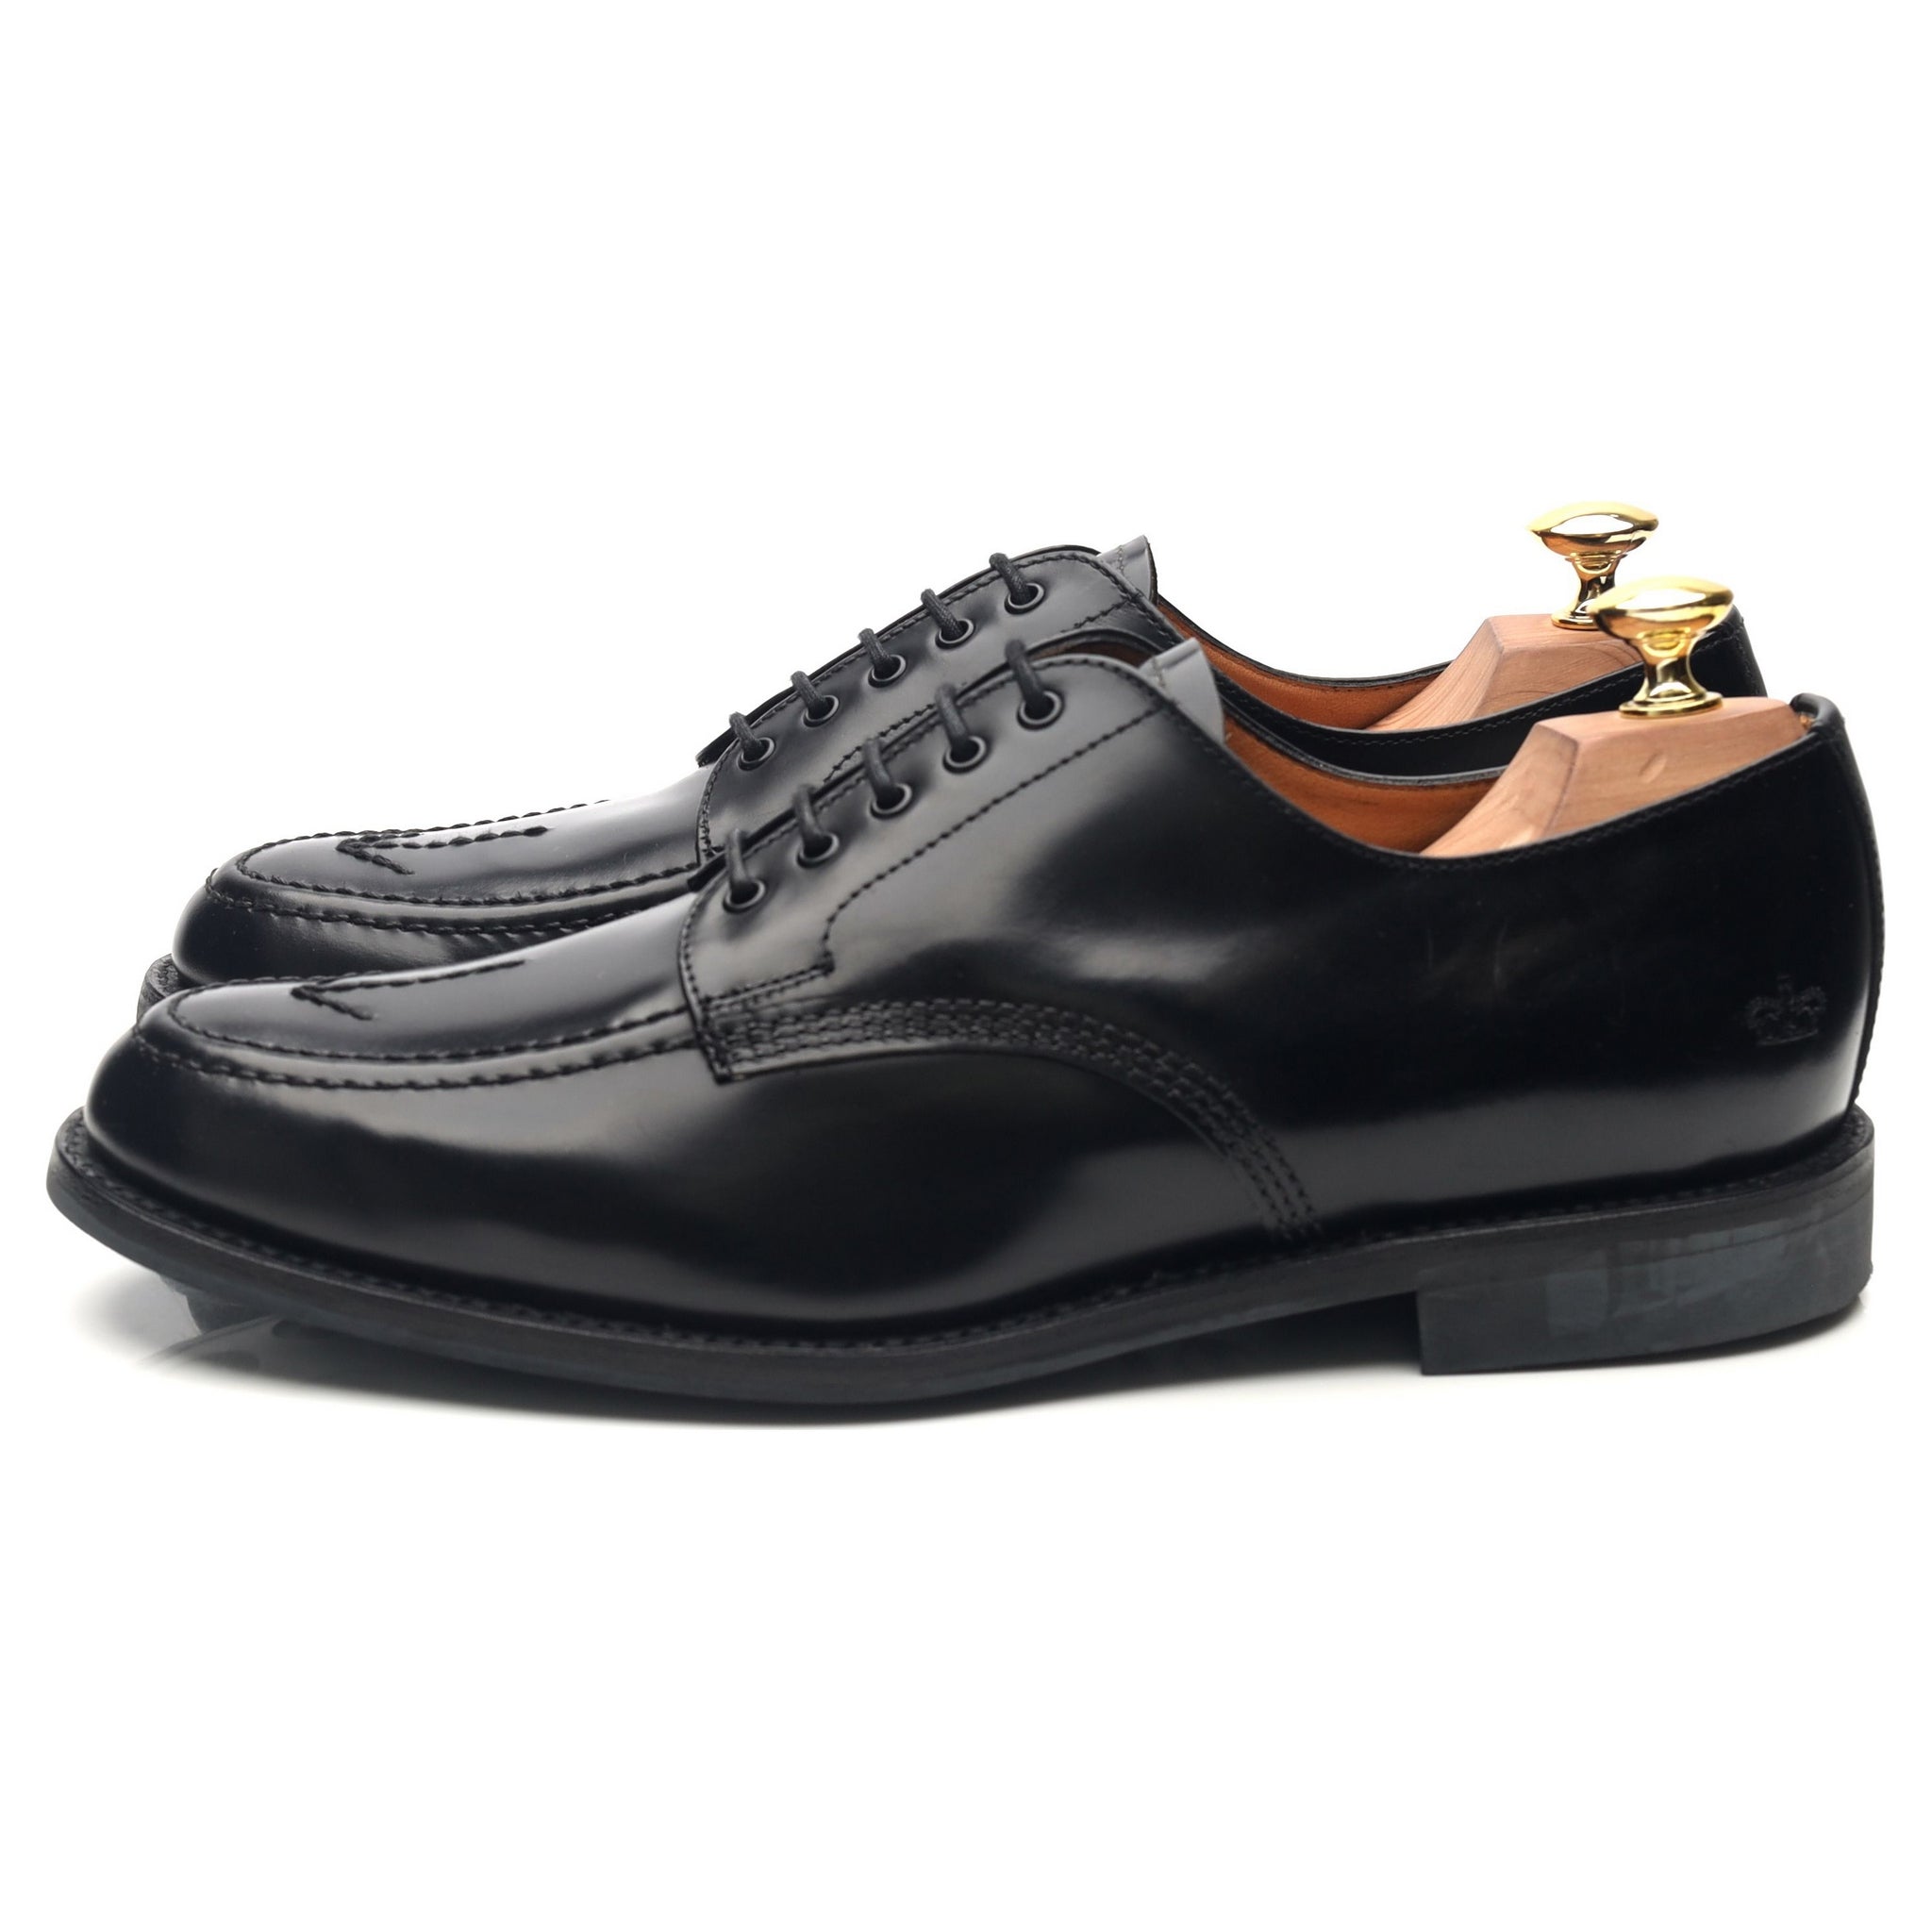 1137B' Black Leather Apron Derby UK 8 F - Abbot's Shoes